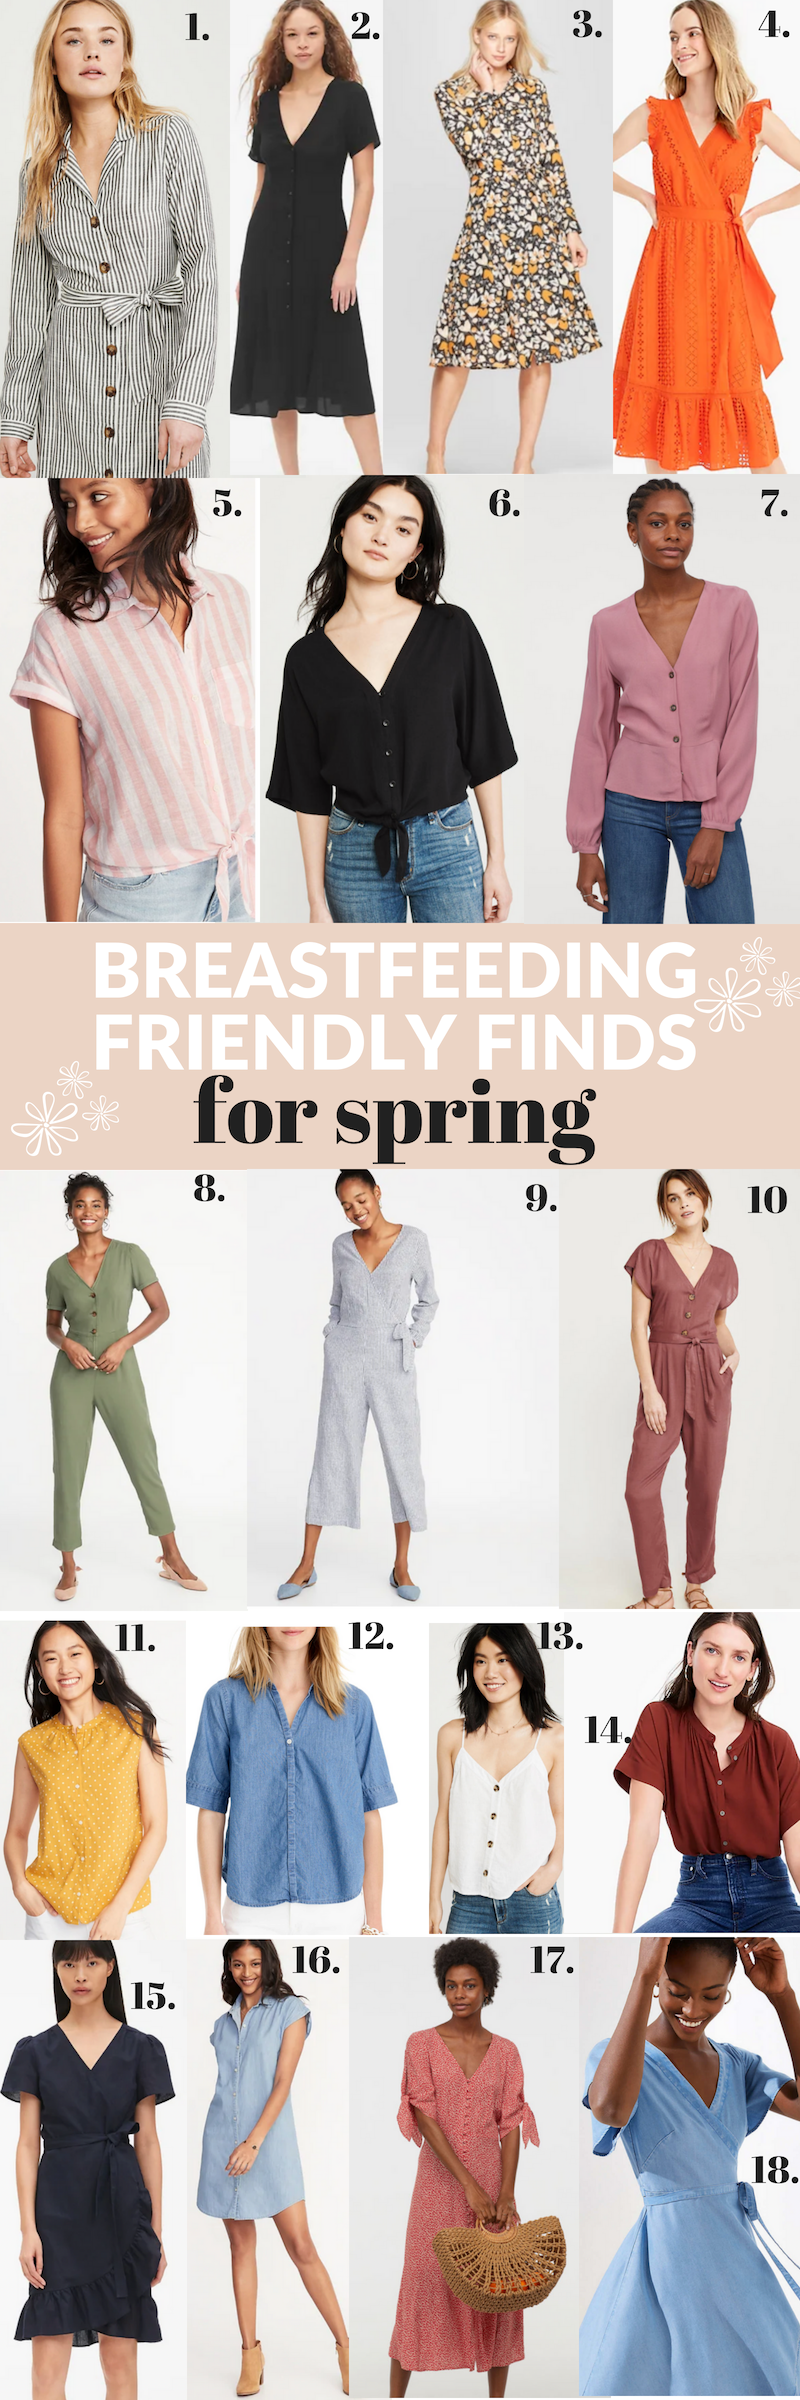 Nursing Friendly Clothes and Outfits to Breastfeed In